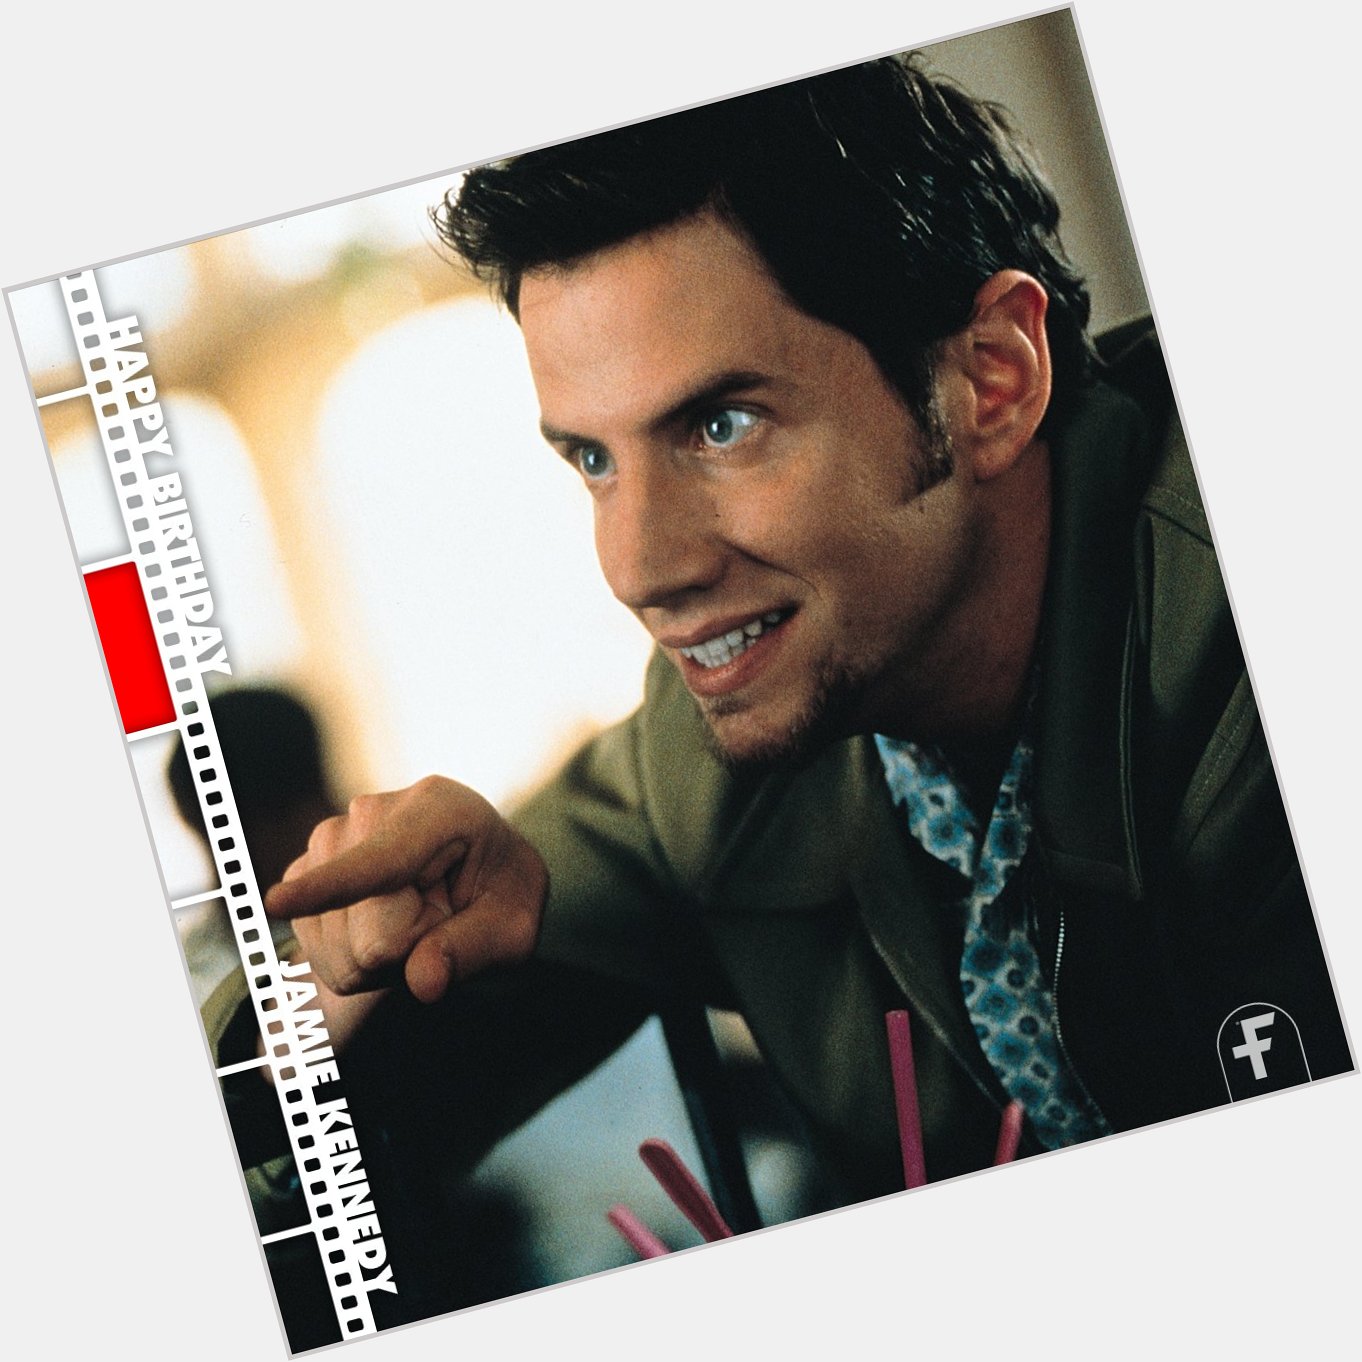 Happy birthday to actor Jamie Kennedy, who famously portrayed Randy in SCREAM and SCREAM 2. 